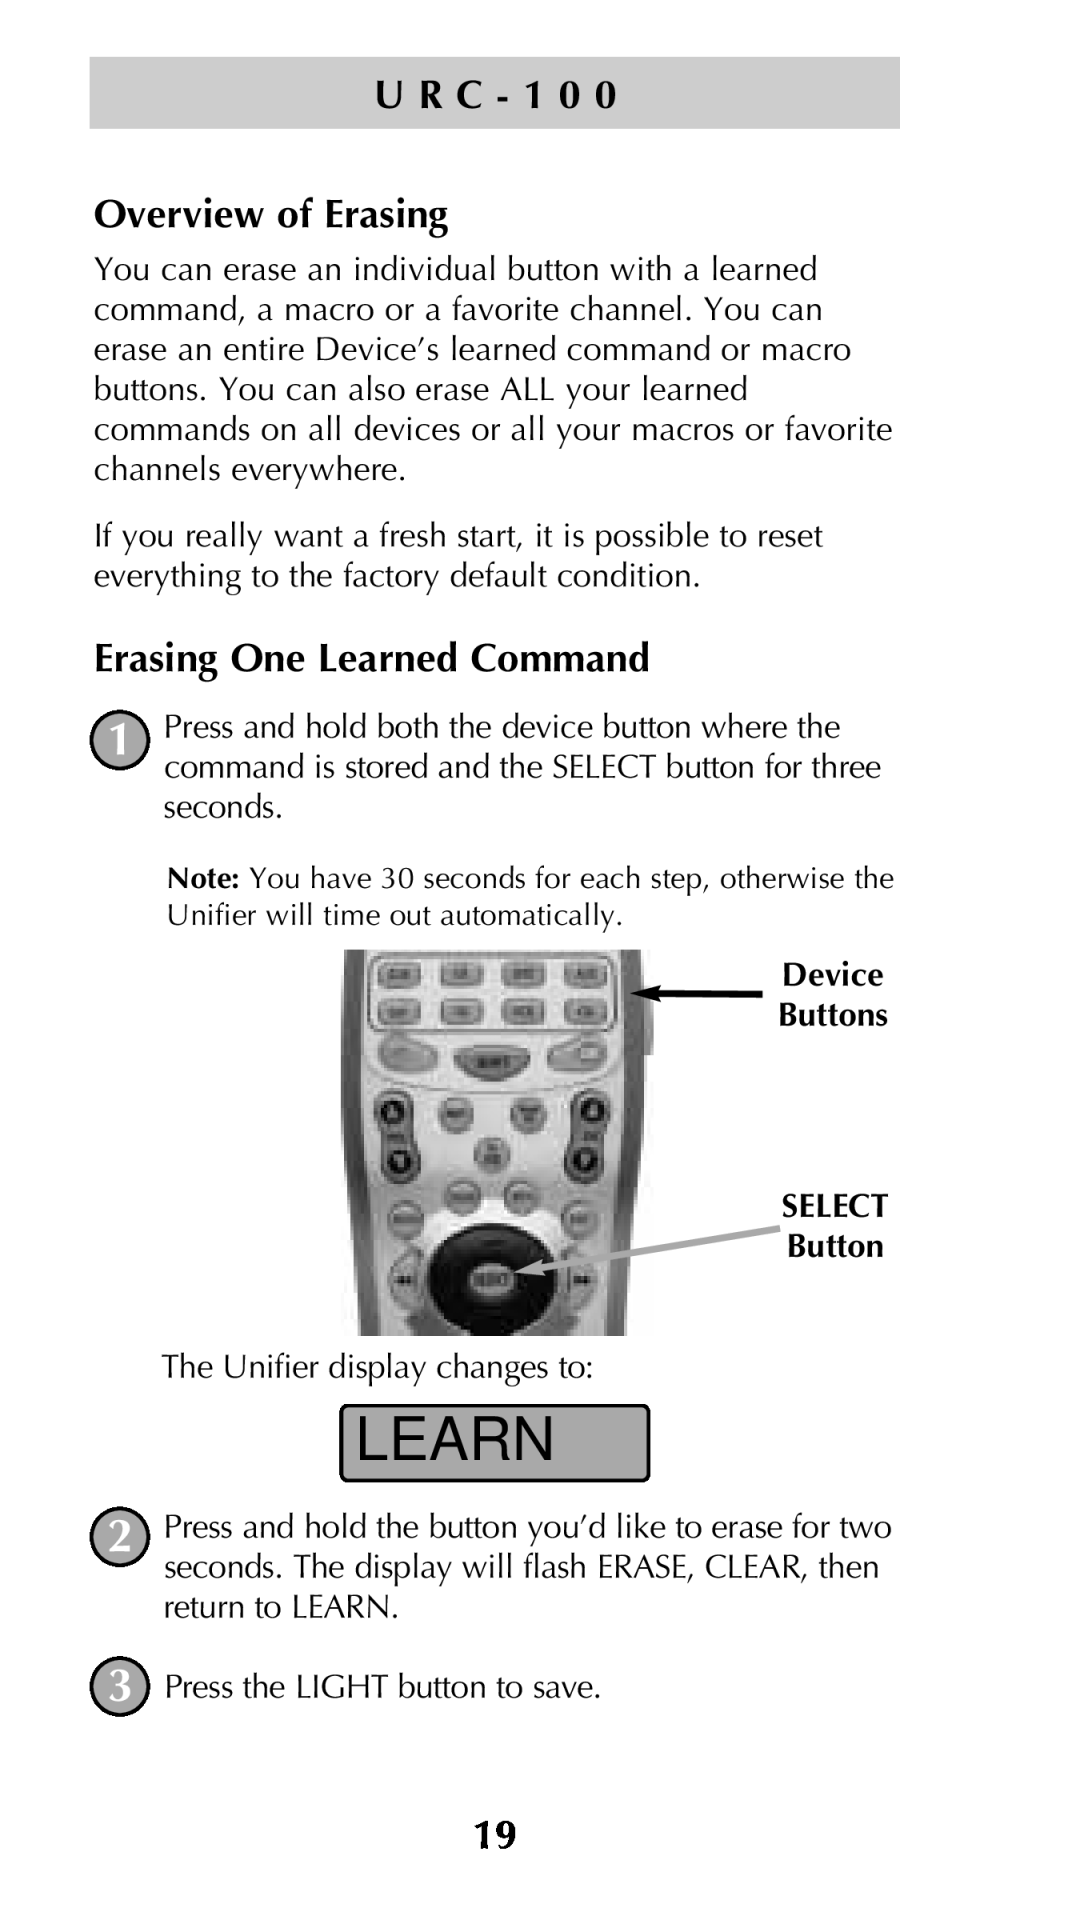 Universal Remote Control Unifier URC-100 owner manual Overview of Erasing, Erasing One Learned Command, U R C - 1 0 